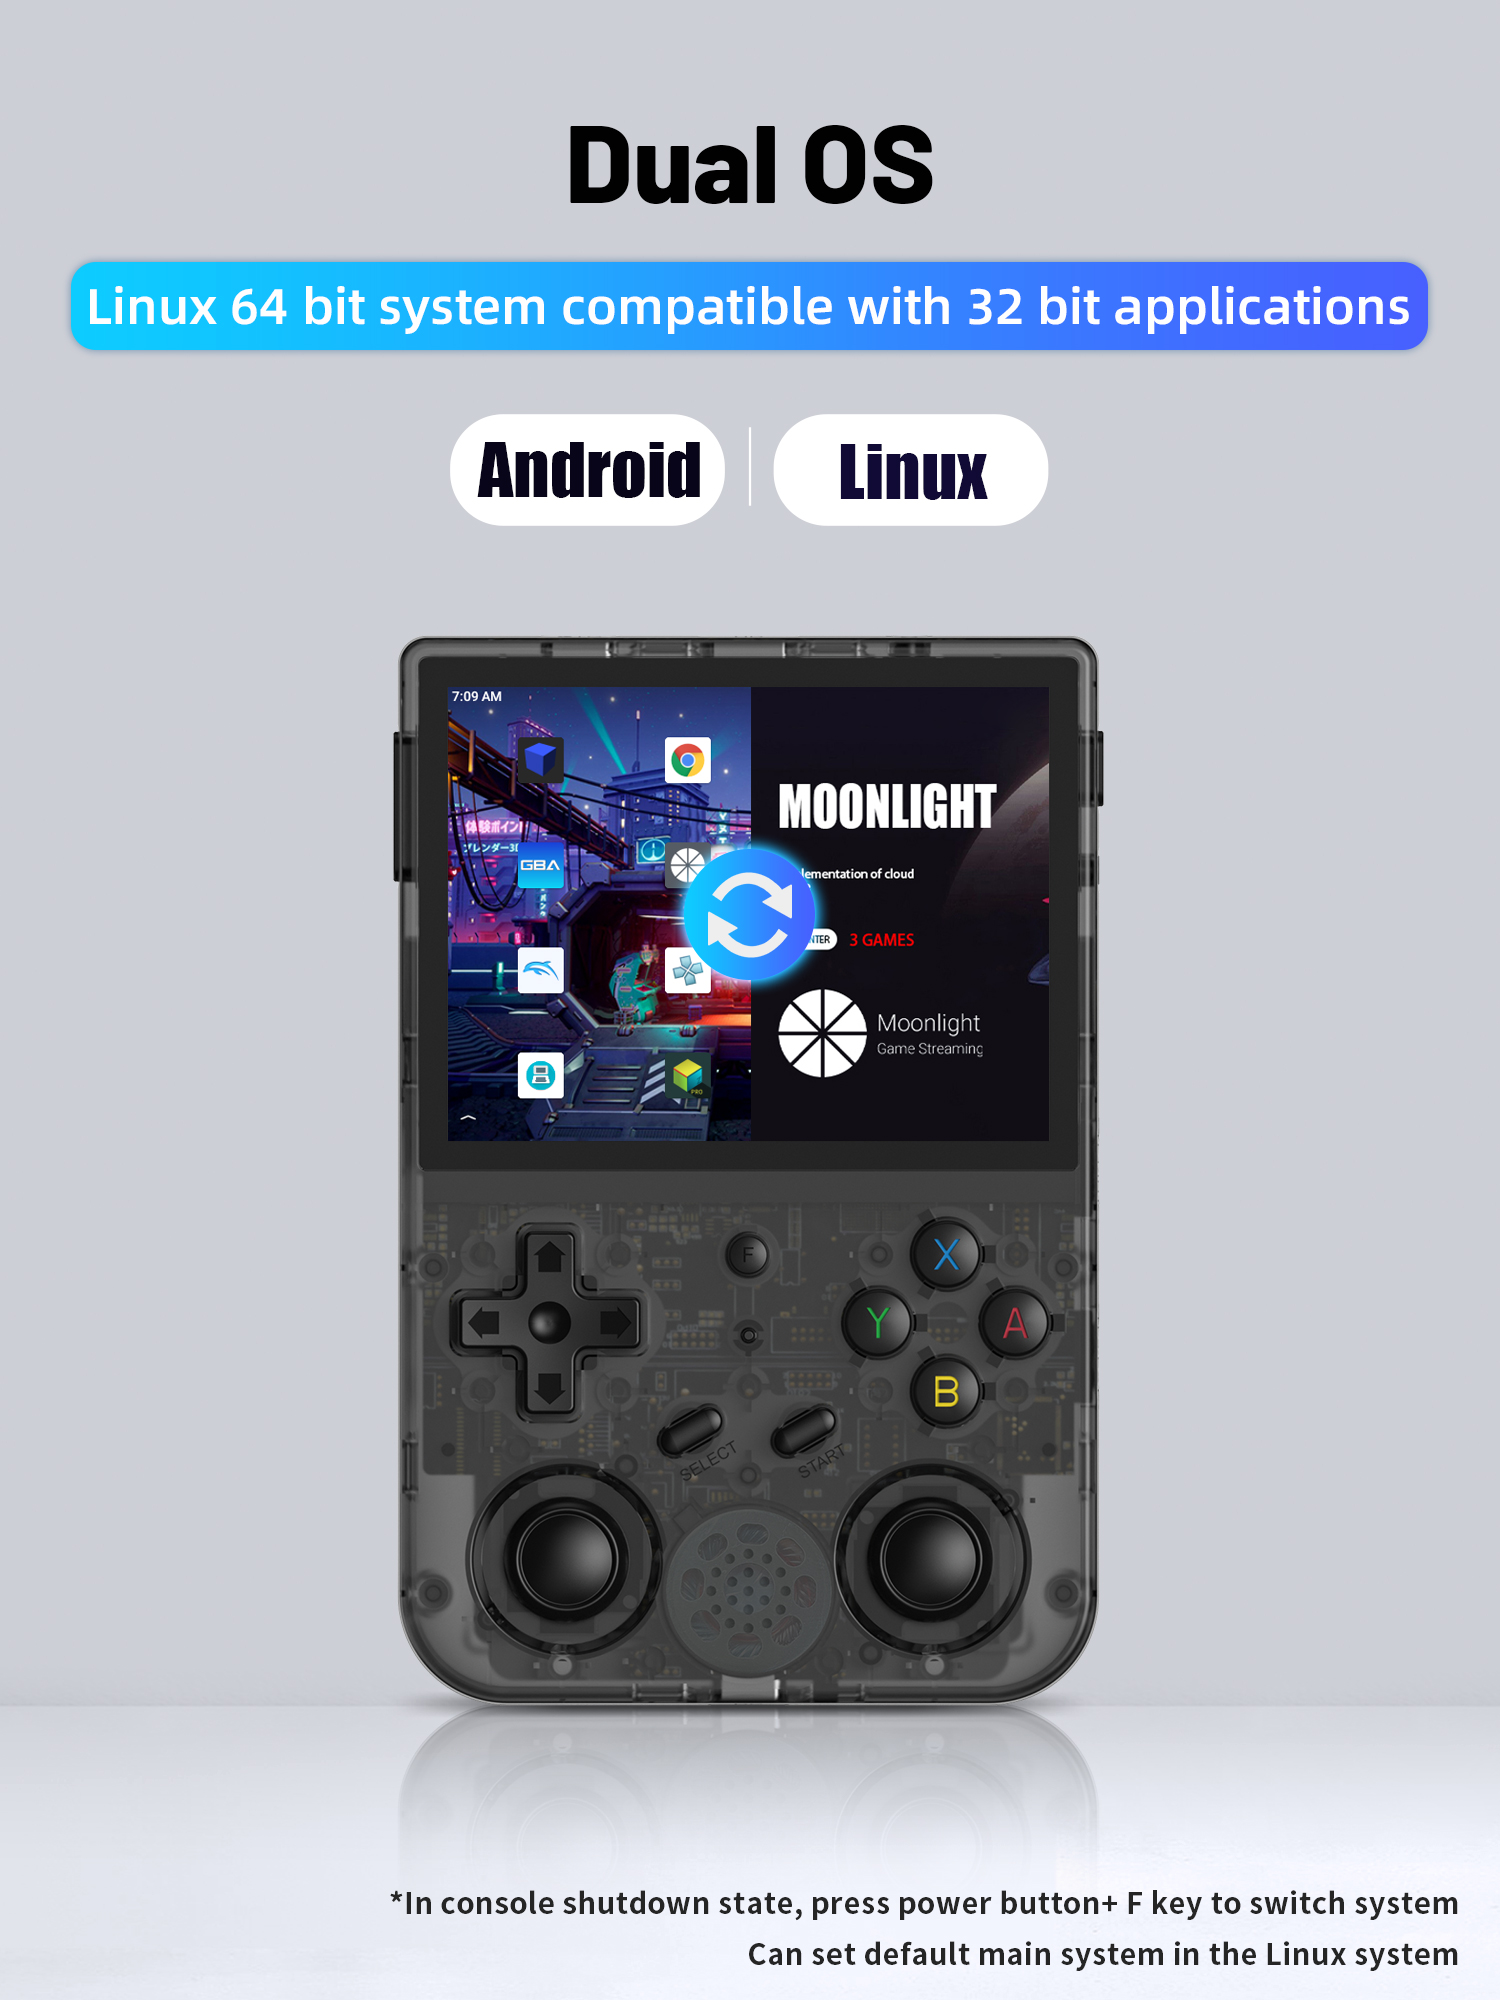 ANBERNIC-RG353V-Android-Linux-Dual-OS-Video-Game-Console-LPDDR4-2GB-RAM-eMMC-51-32GB-ROM-5G-WiF-BT42-1973699-2